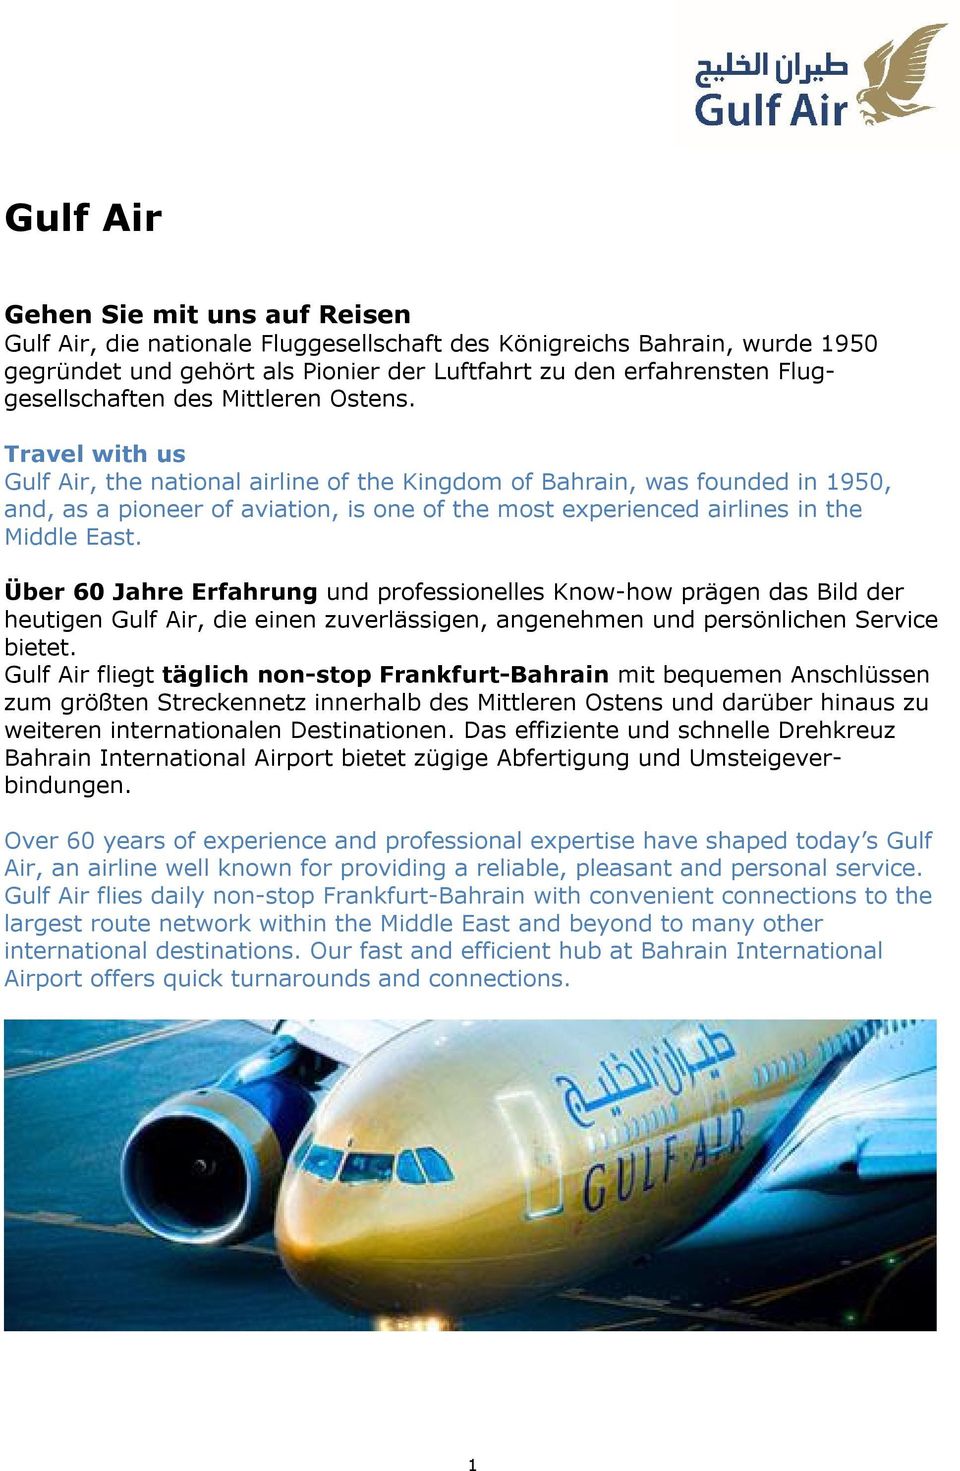 Travel with us Gulf Air, the national airline of the Kingdom of Bahrain, was founded in 1950, and, as a pioneer of aviation, is one of the most experienced airlines in the Middle East.